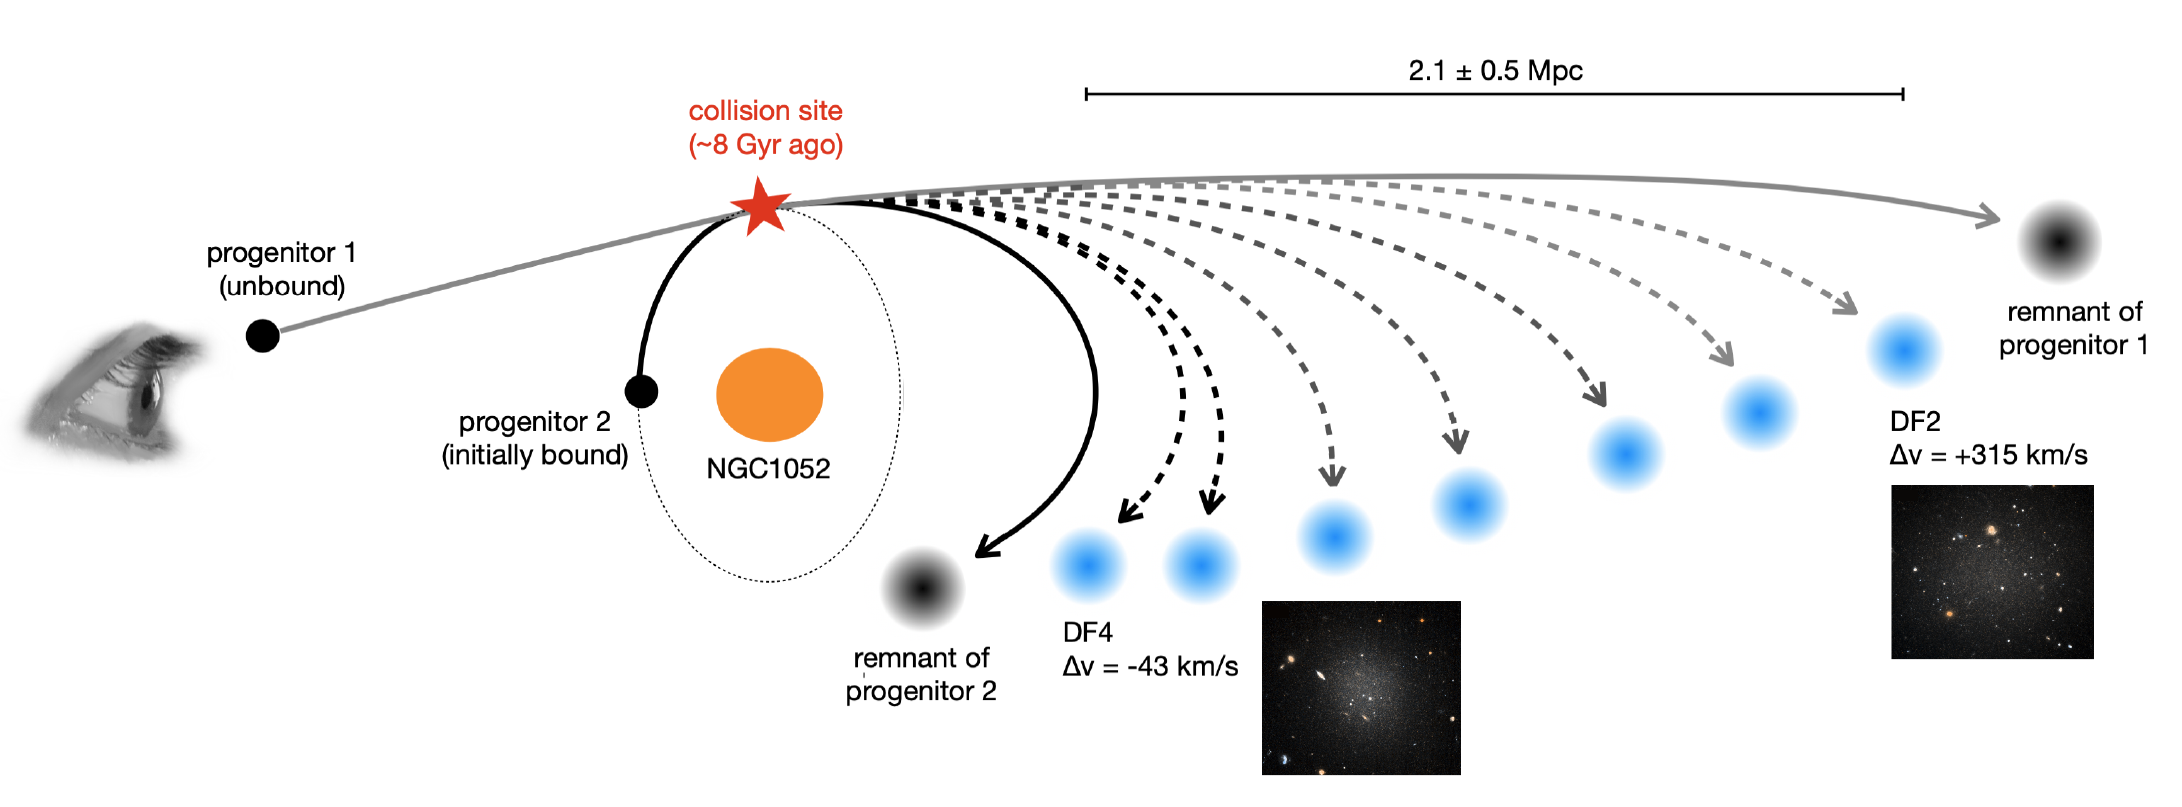 Schematic diagram, showing a galaxy ("progenitor 1") approaching a second galaxy ("progenitor 2"), which is orbiting around a group (), which is orbiting around a group ("NGC1052"). A point in the orbit of progenitor 2 is labelled as the collision site of these two galaxies. These two galaxies are then shown to split into seven smaller objects, plus two that are labeled as "remnants"colored black to represent their high dark matter content.